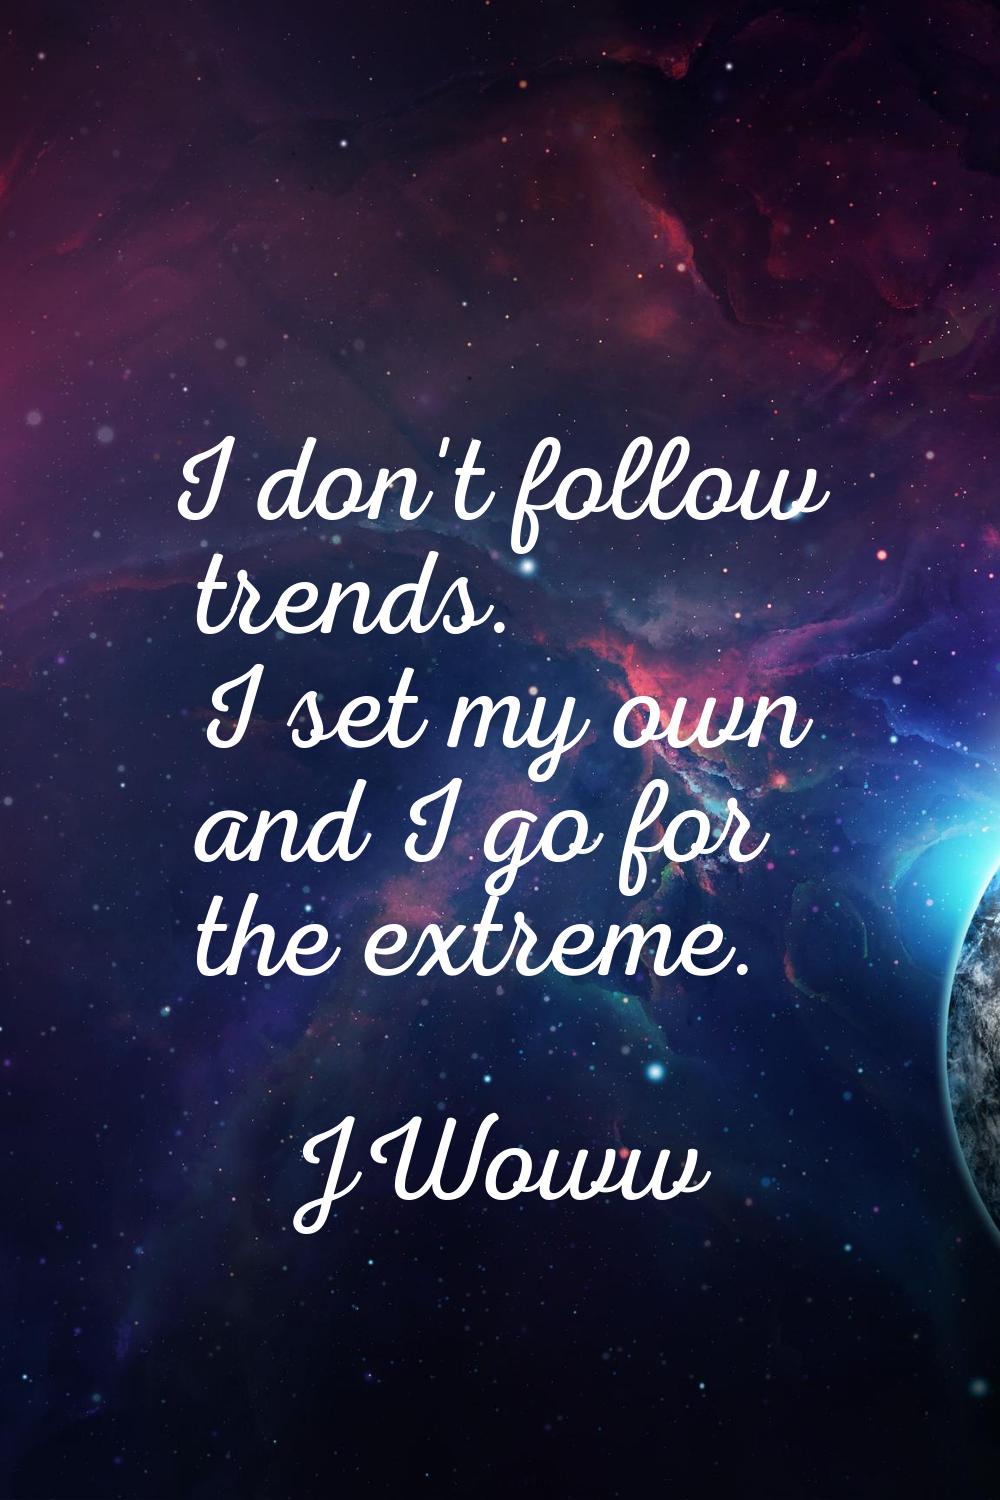 I don't follow trends. I set my own and I go for the extreme.